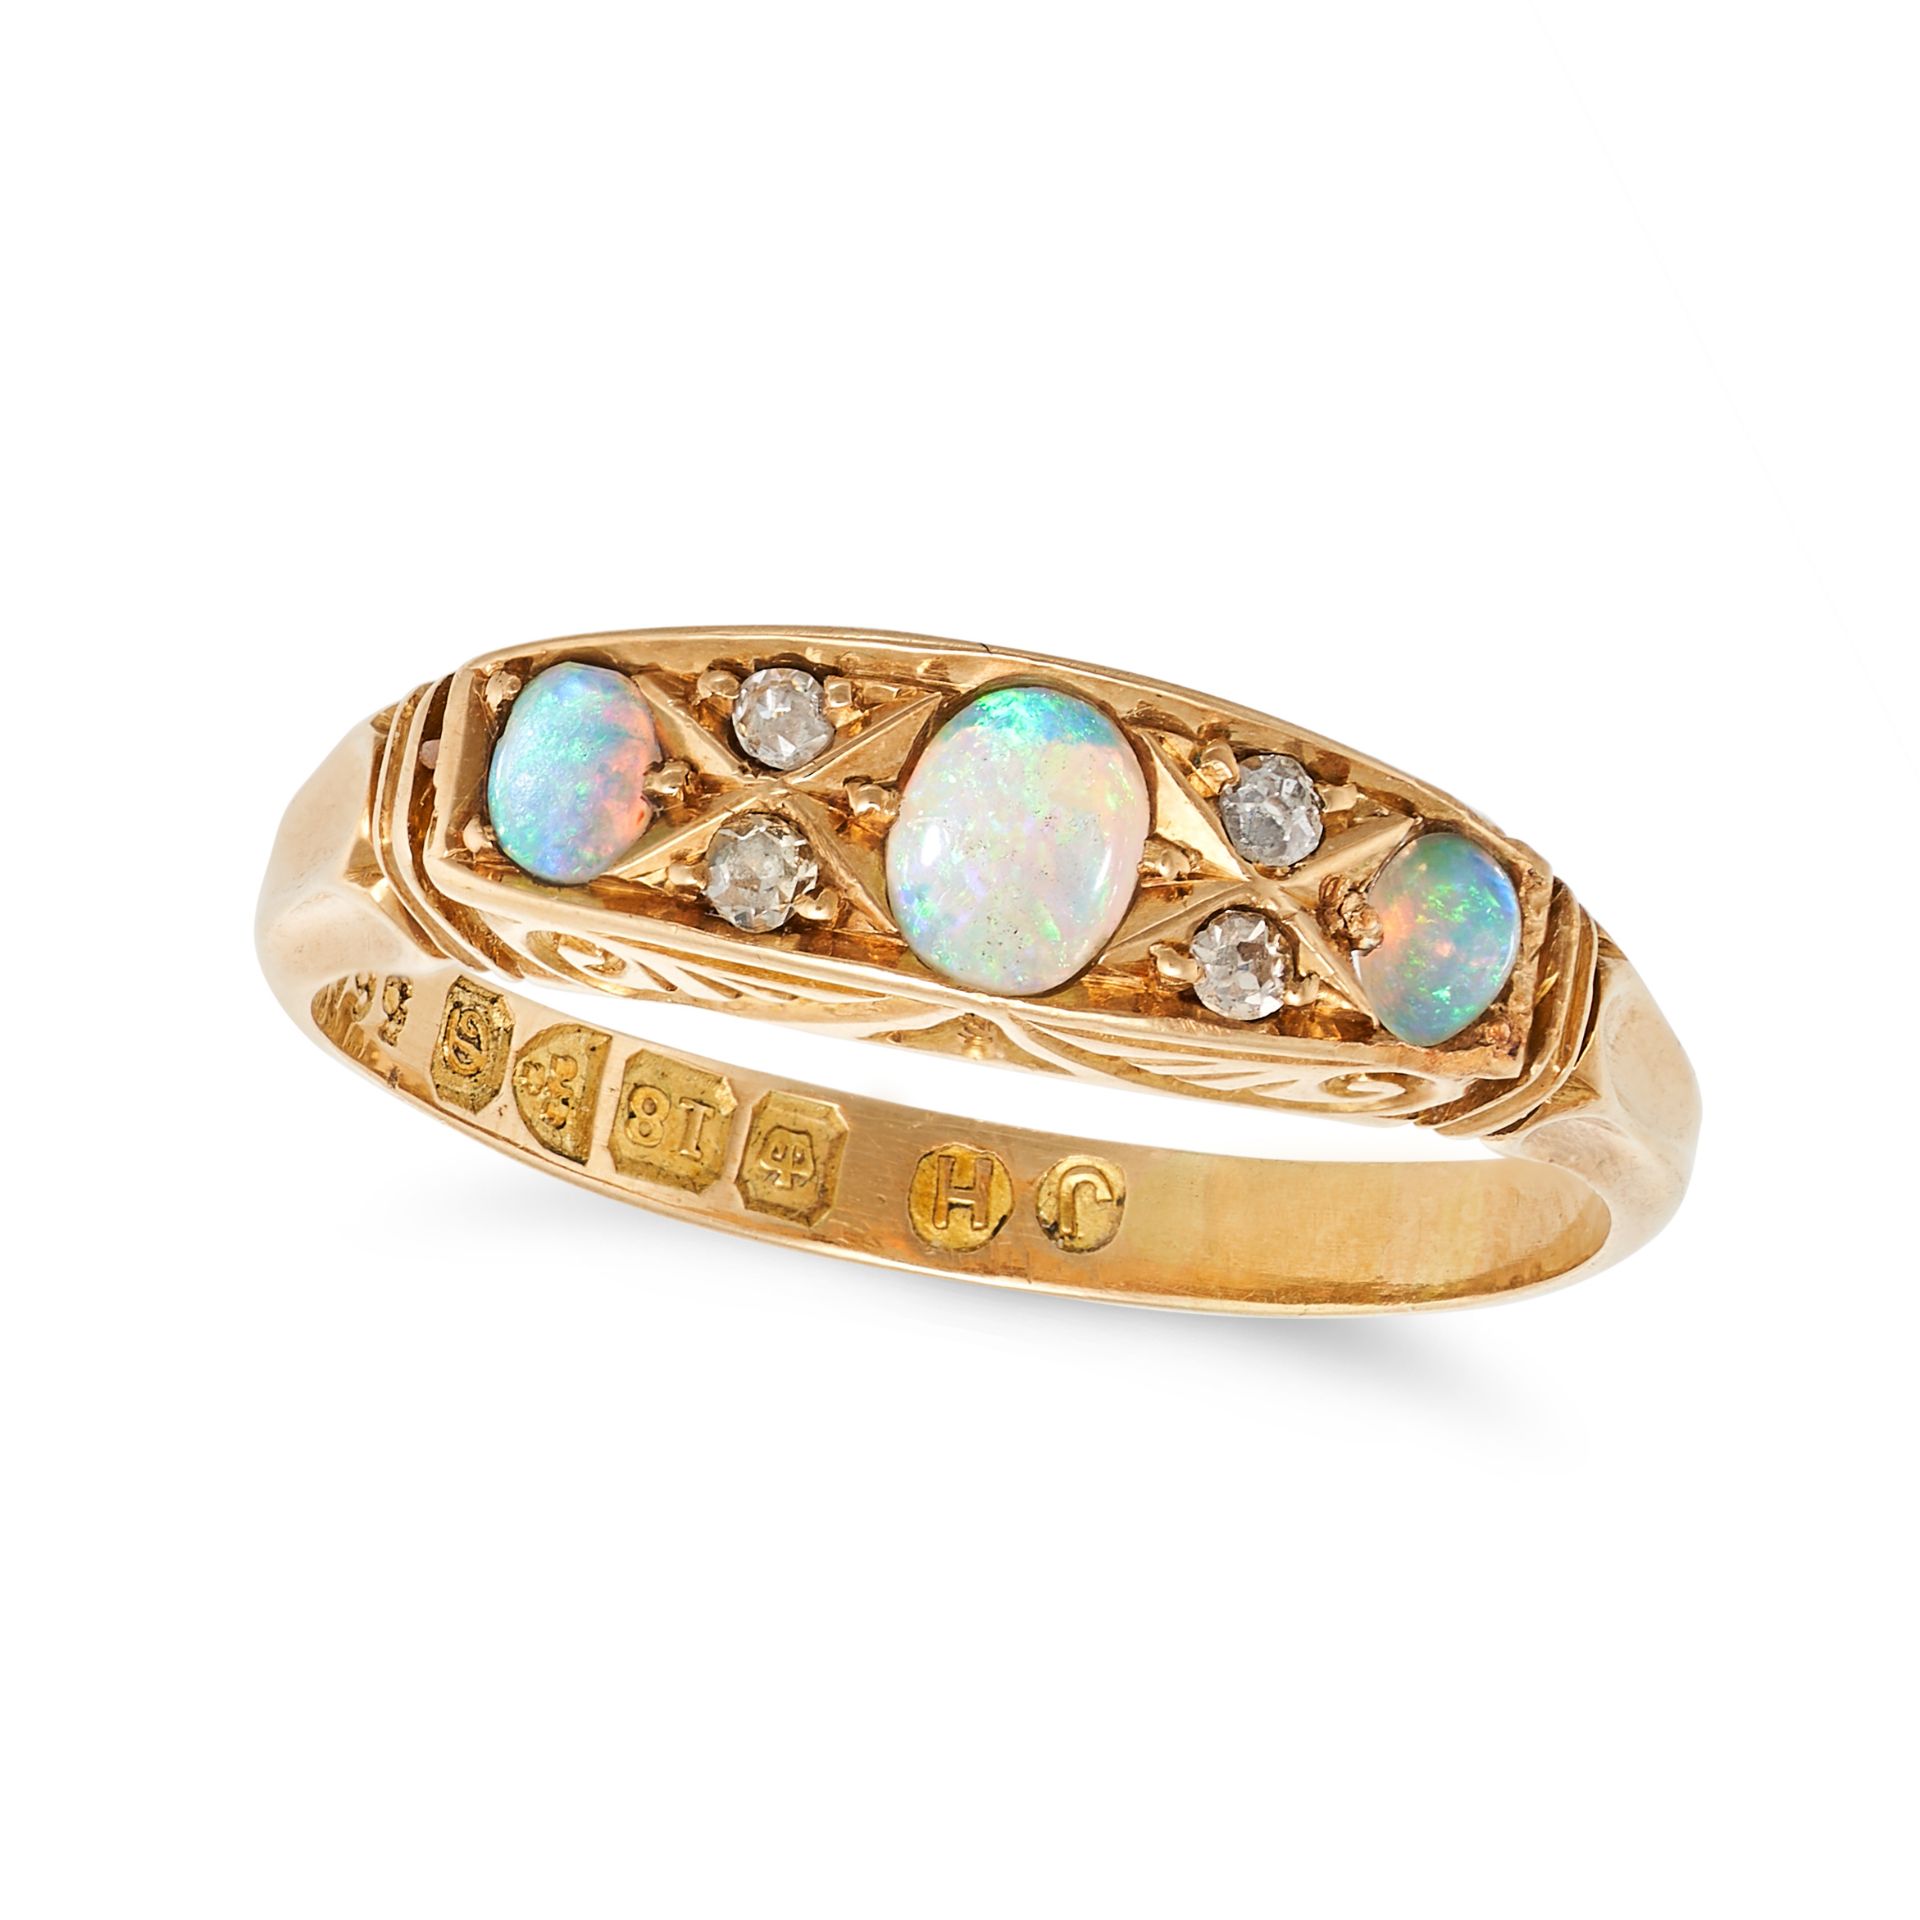 AN ANTIQUE EDWARDIAN OPAL AND DIAMOND RING in 18ct yellow gold, set with three cabochon opals pun...